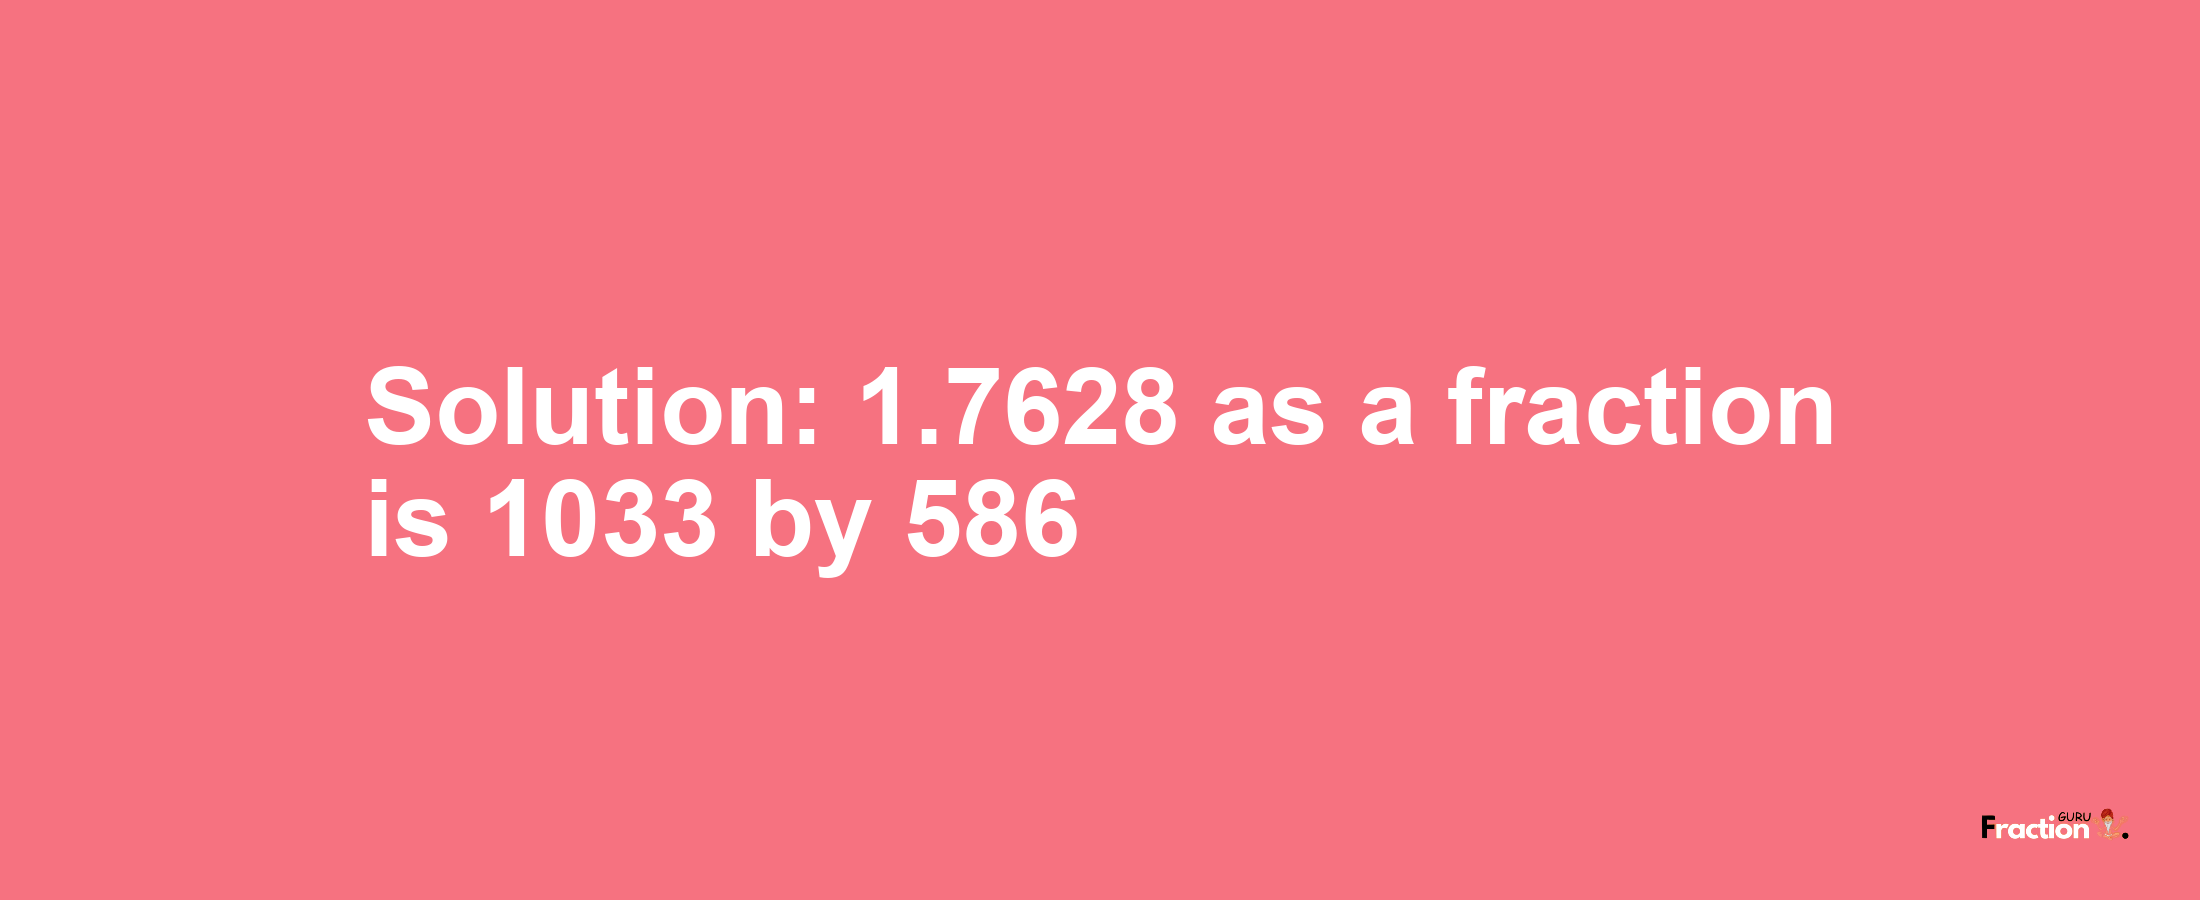 Solution:1.7628 as a fraction is 1033/586